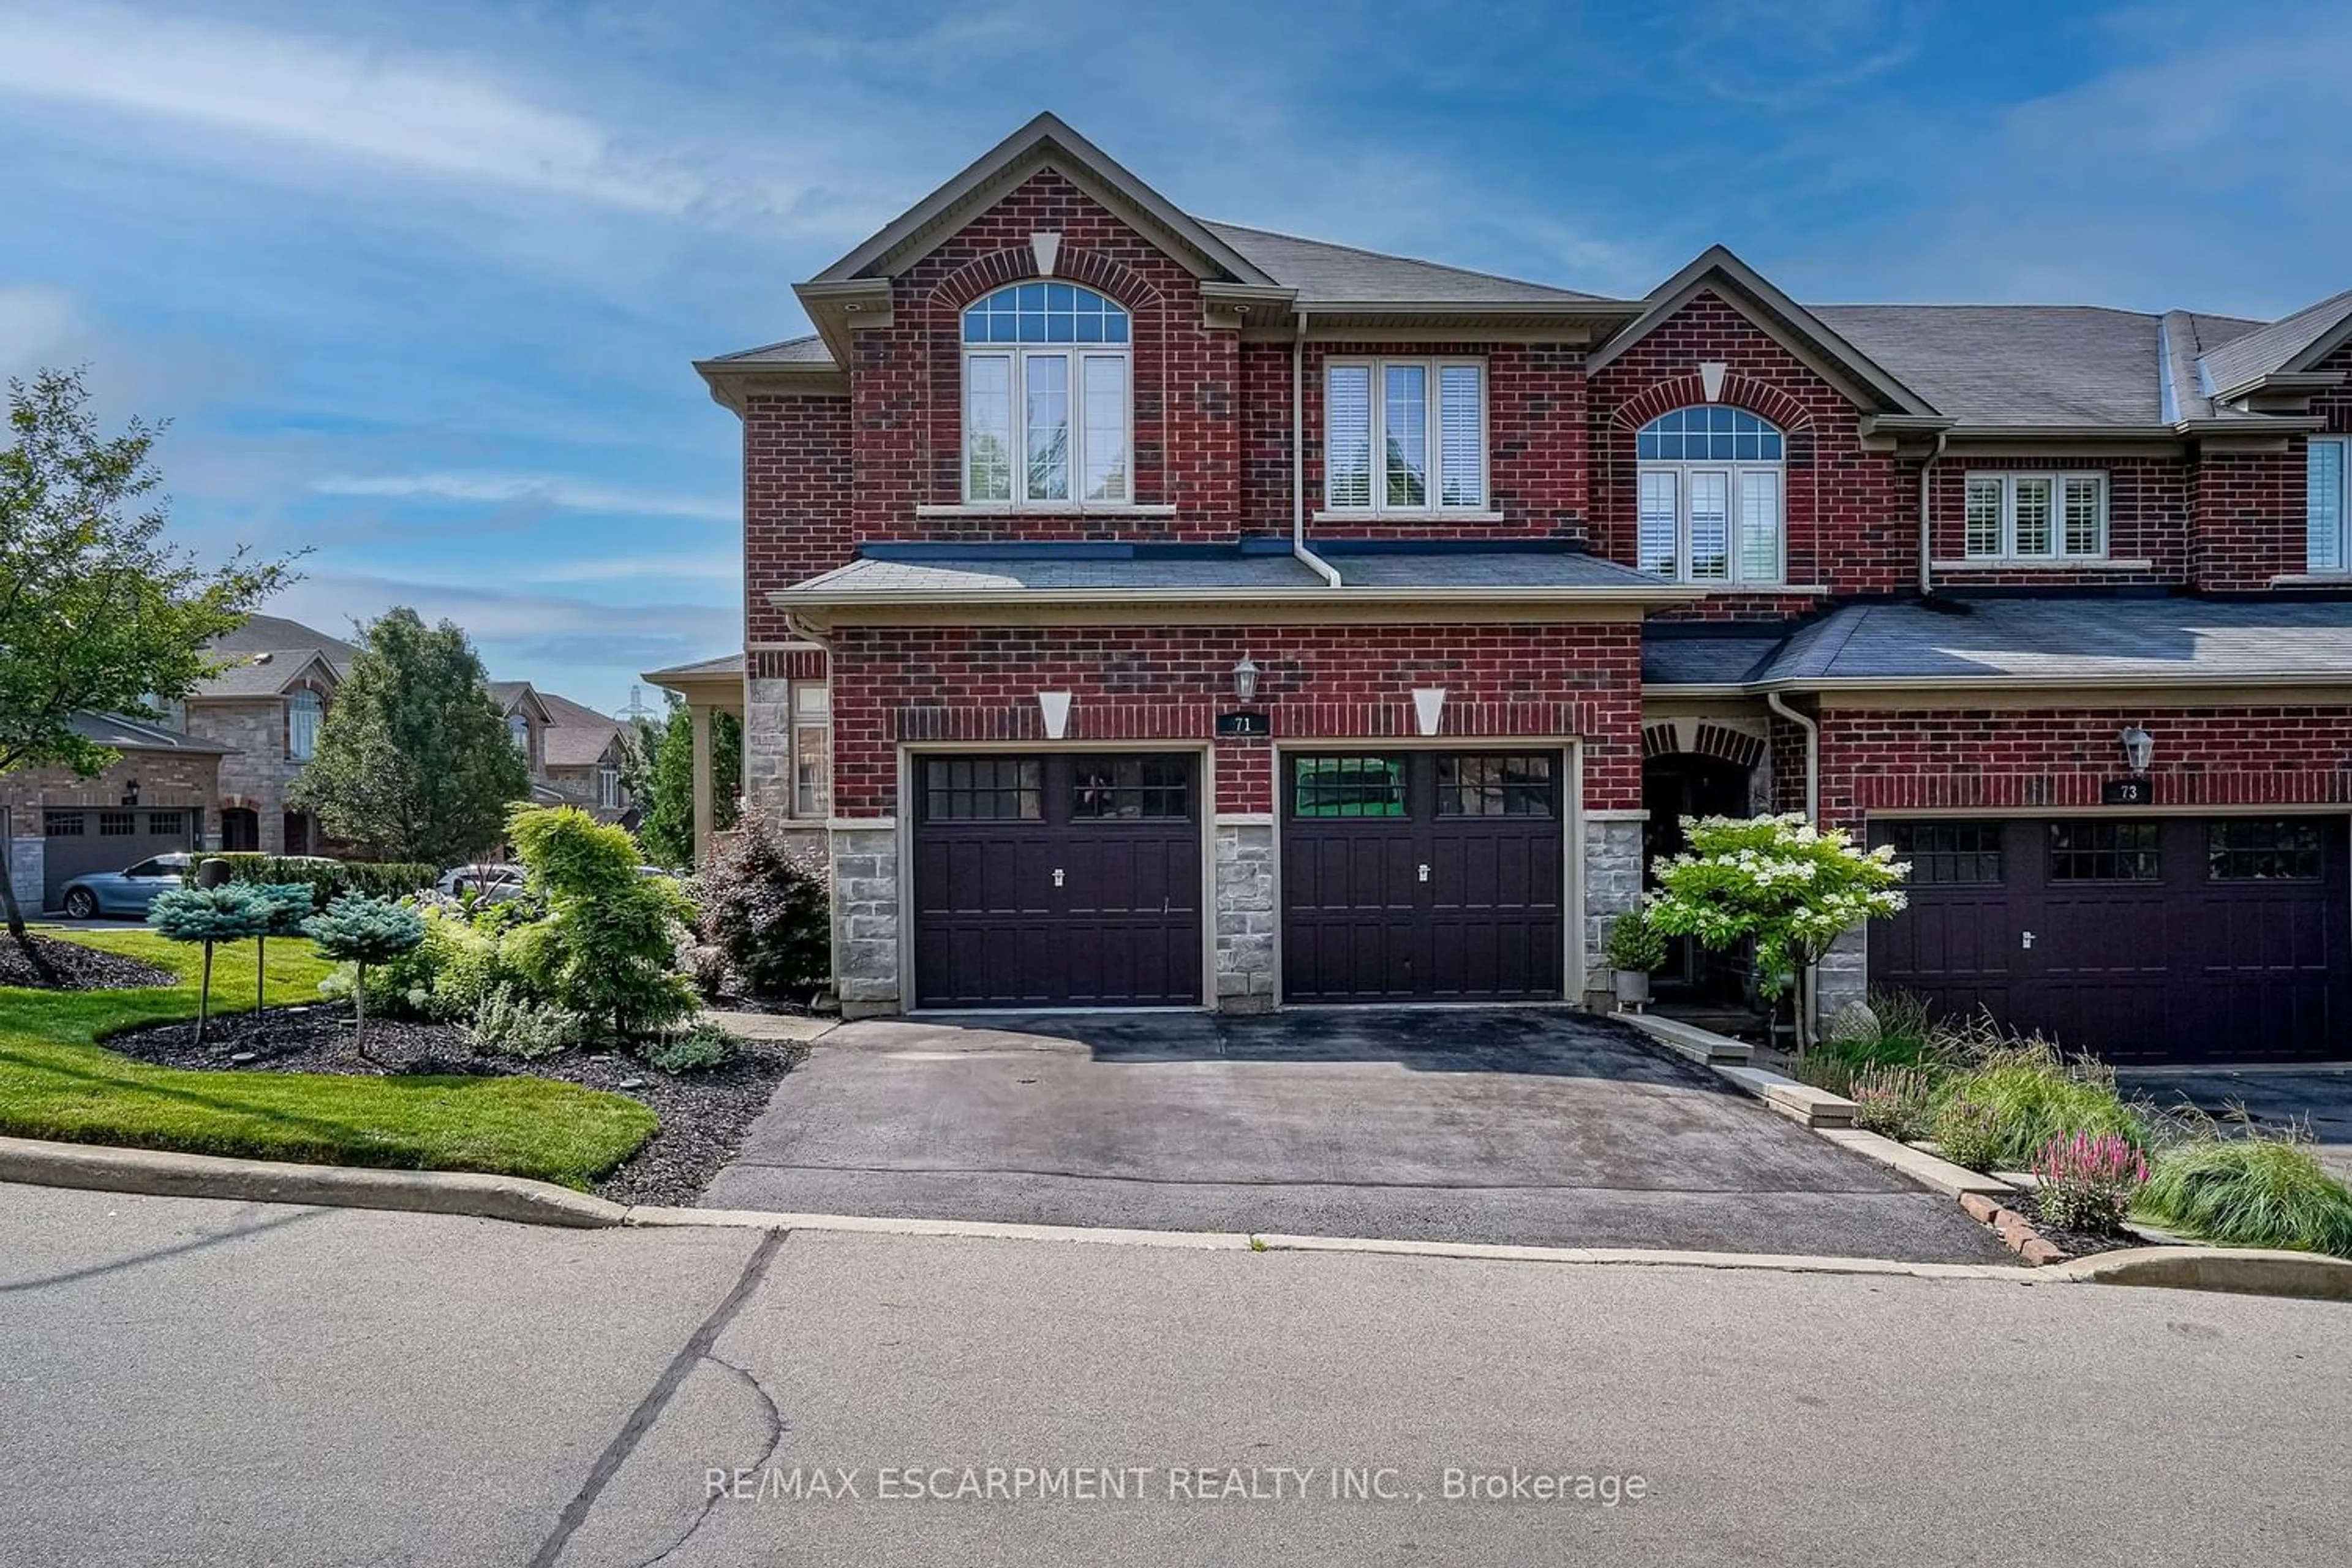 Home with brick exterior material for 71 Oakhaven Pl, Hamilton Ontario L9H 0B6